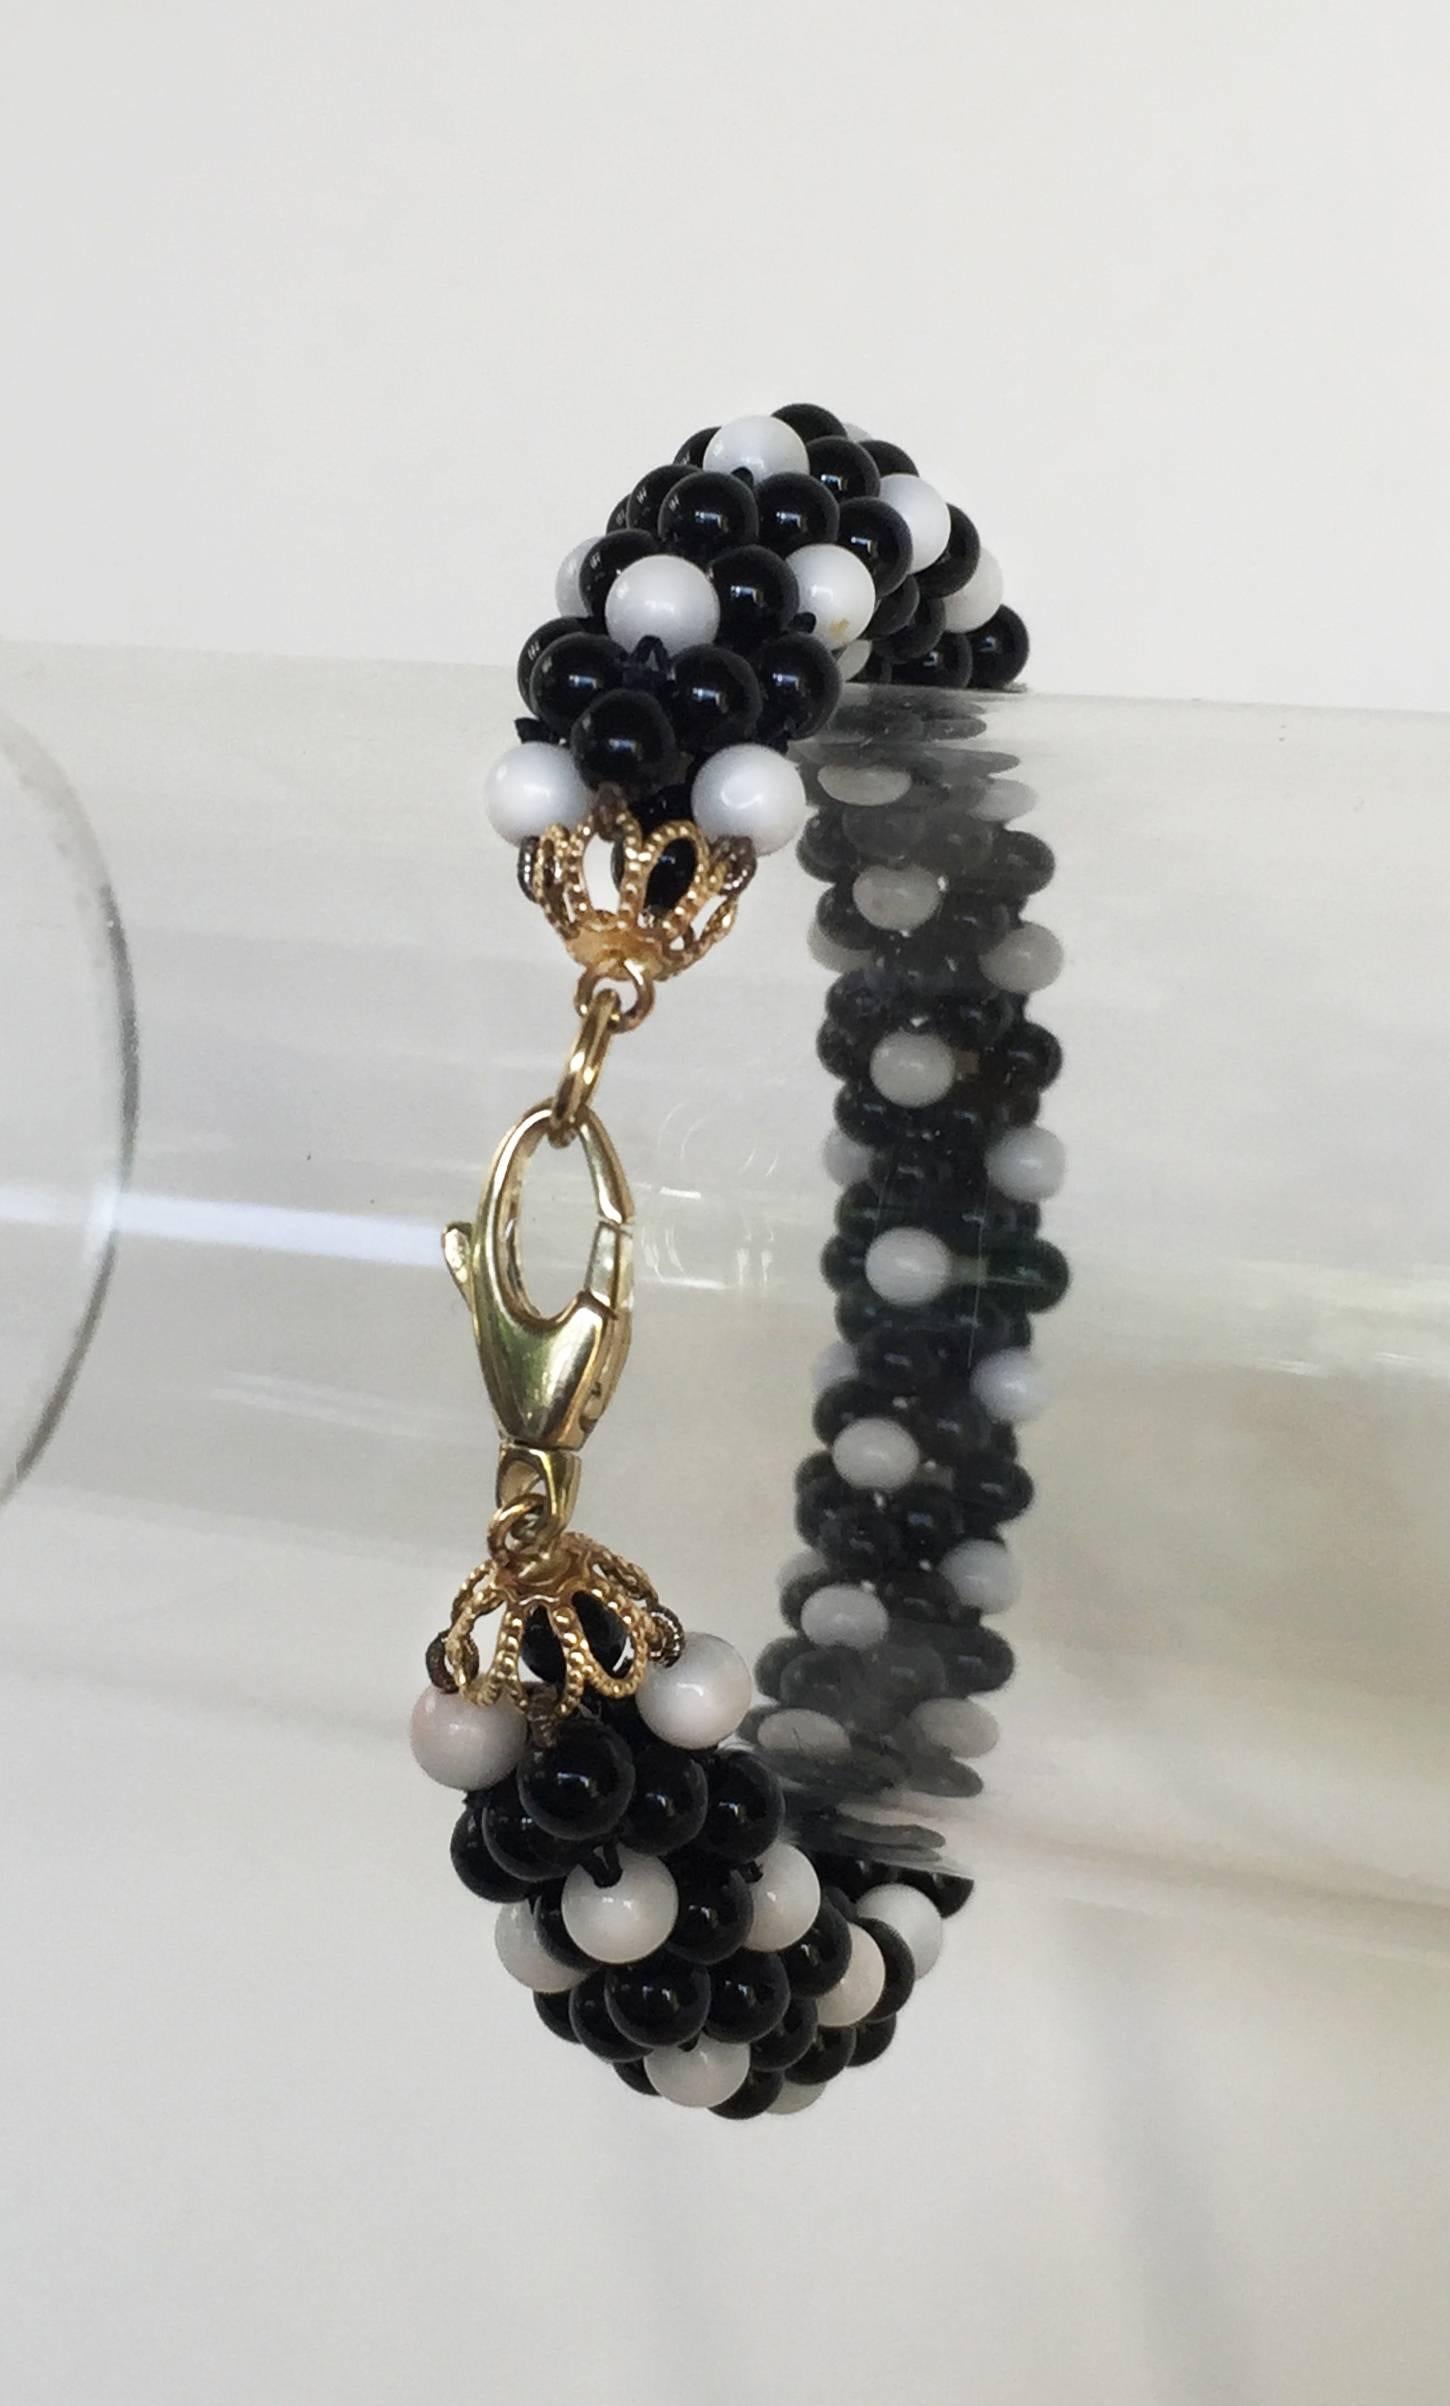 This intricately woven rope bracelet is composed of white coral and black onyx beads with a 14k yellow gold clasp. The black and white checkered effect is reminiscent of  1960s Mod fashion. At 7.5 inches long and 1 inch thick, it fits perfectly on